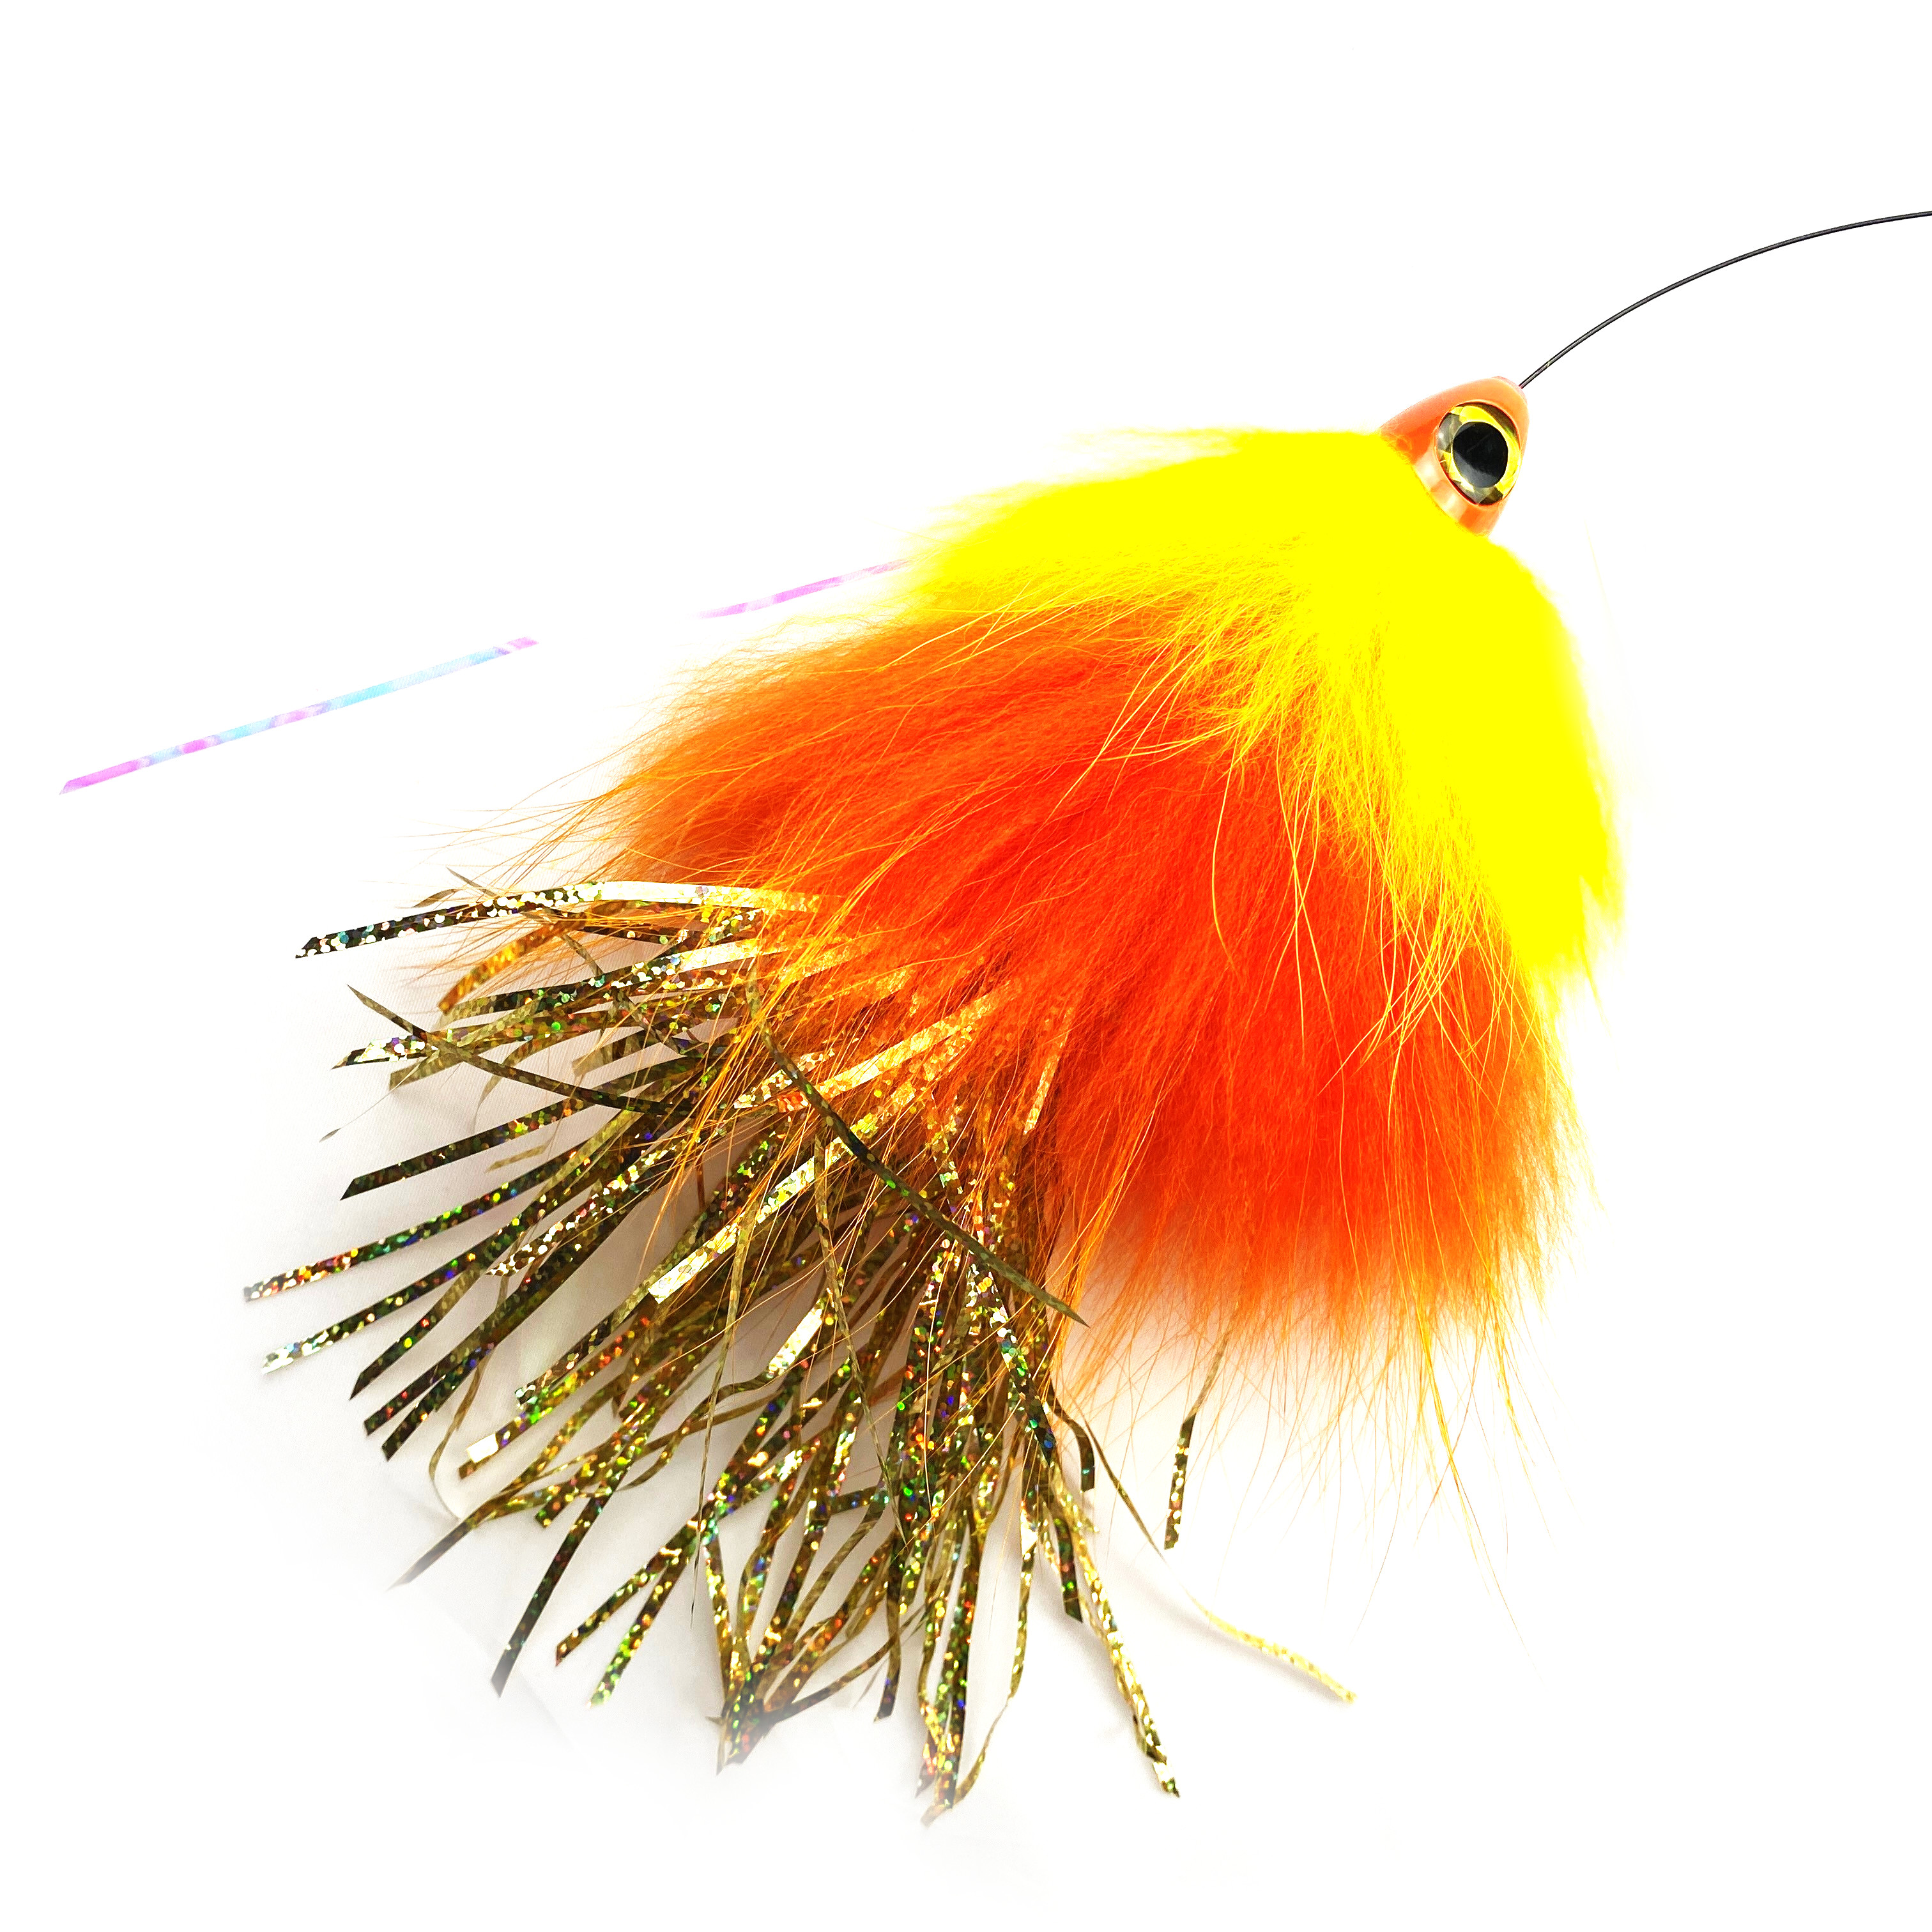 Fly Fishing Kits - Fly fishing kits for seatrout - Fly kits for salmon